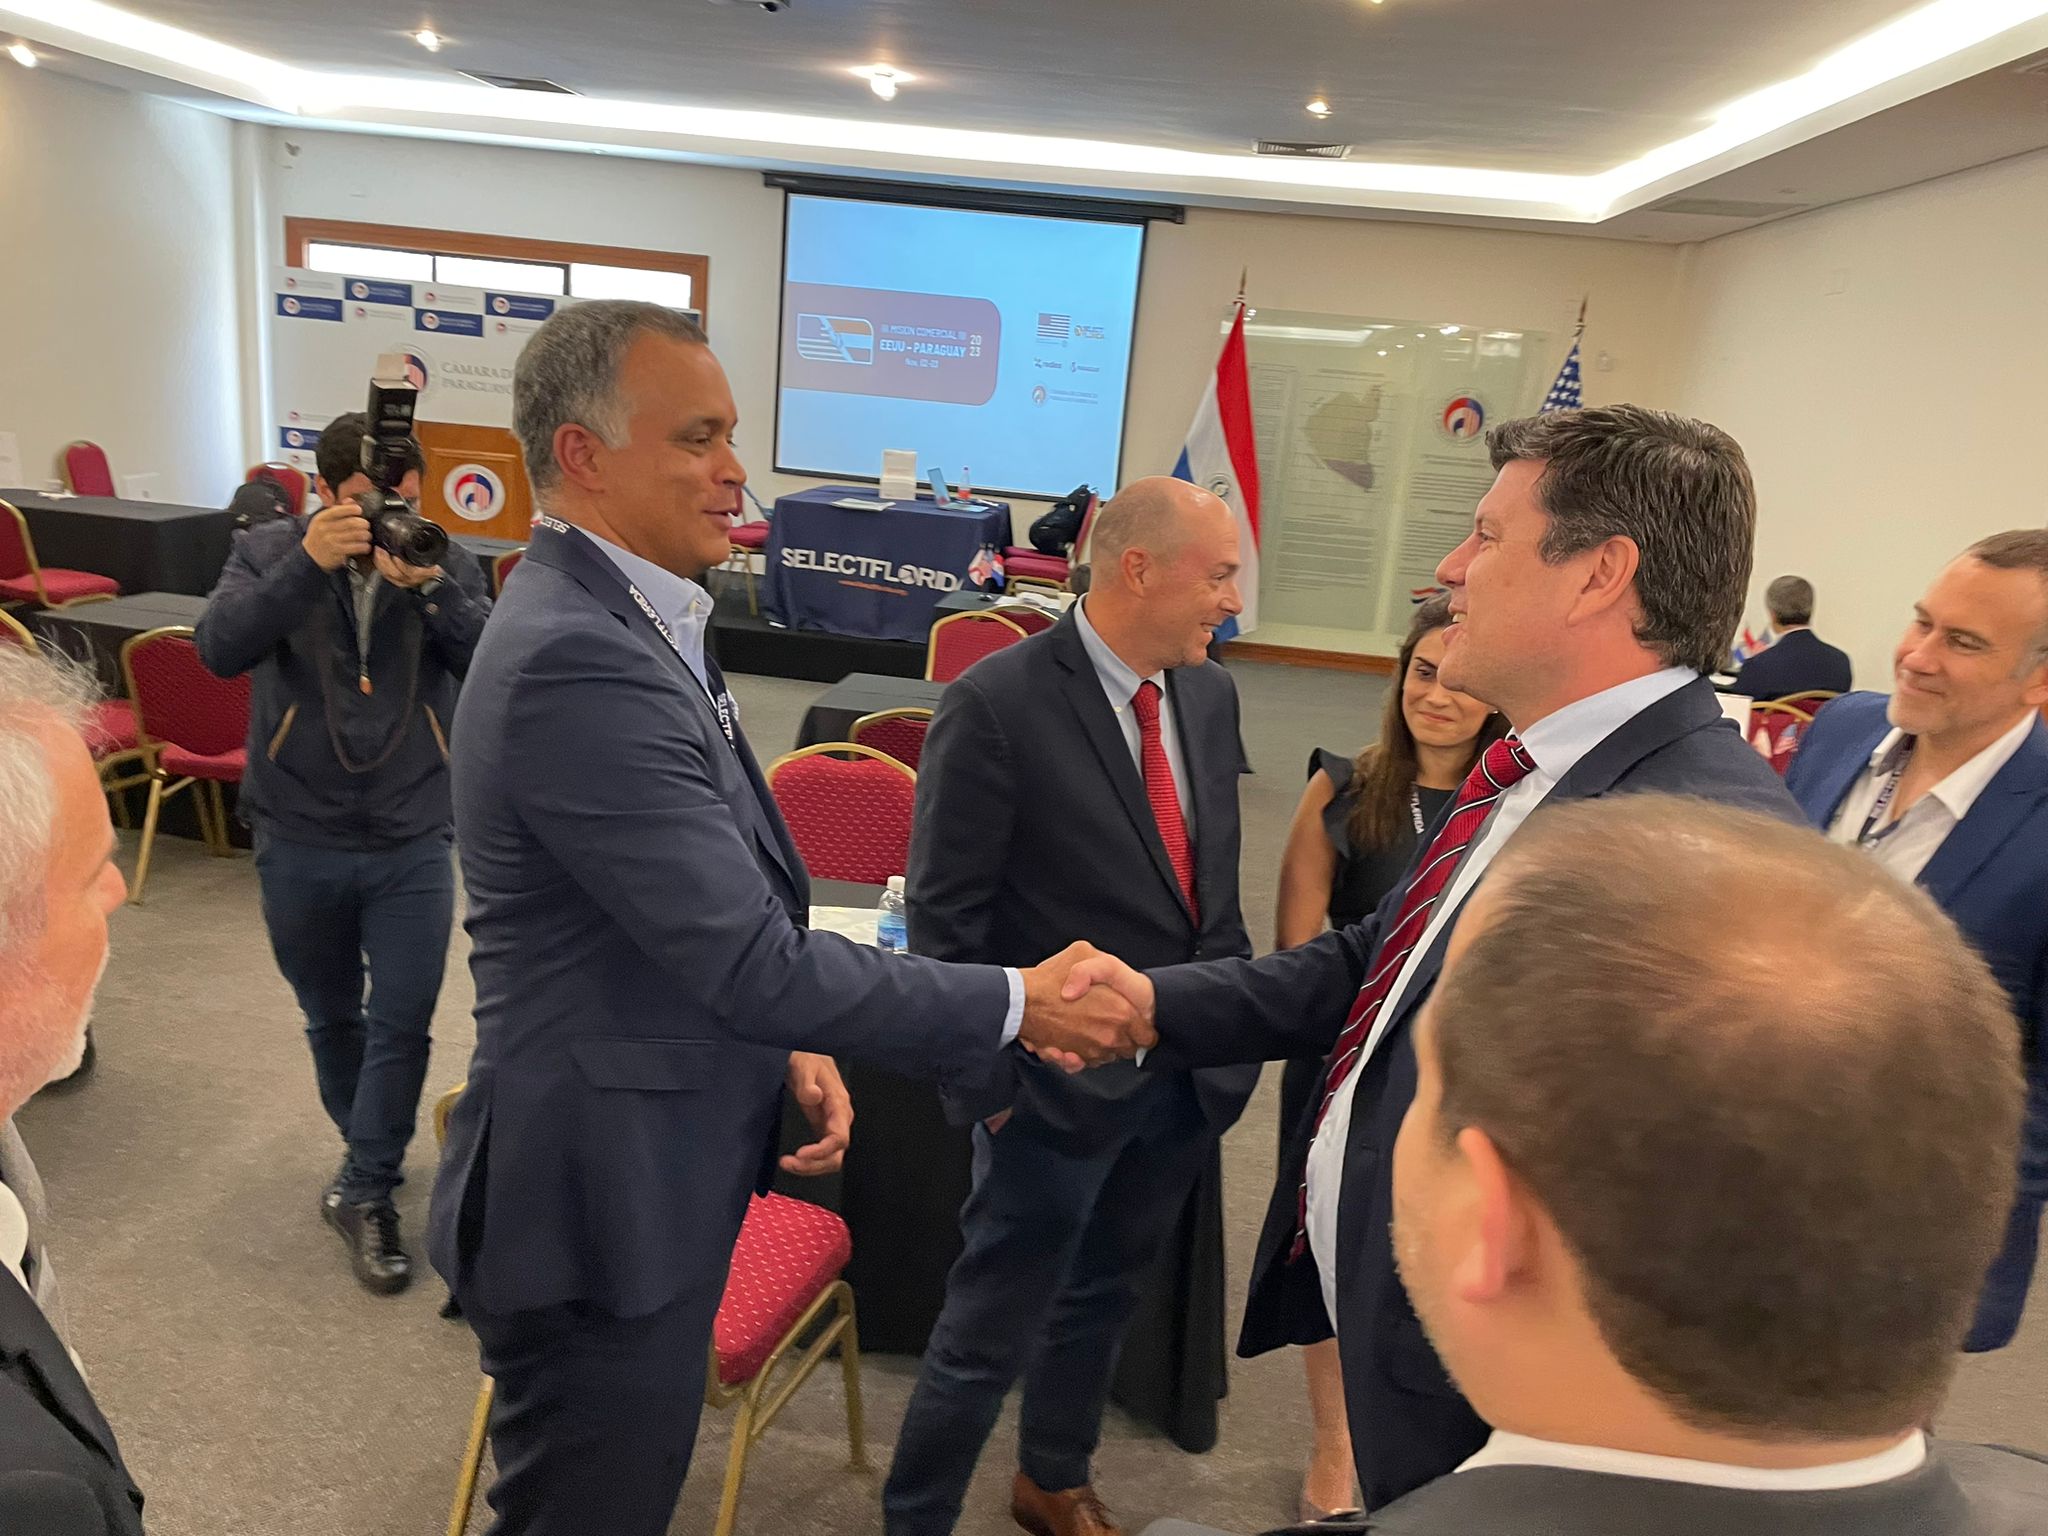 Jose shaking hands with Paraguay's Minister of Commerce and Industry